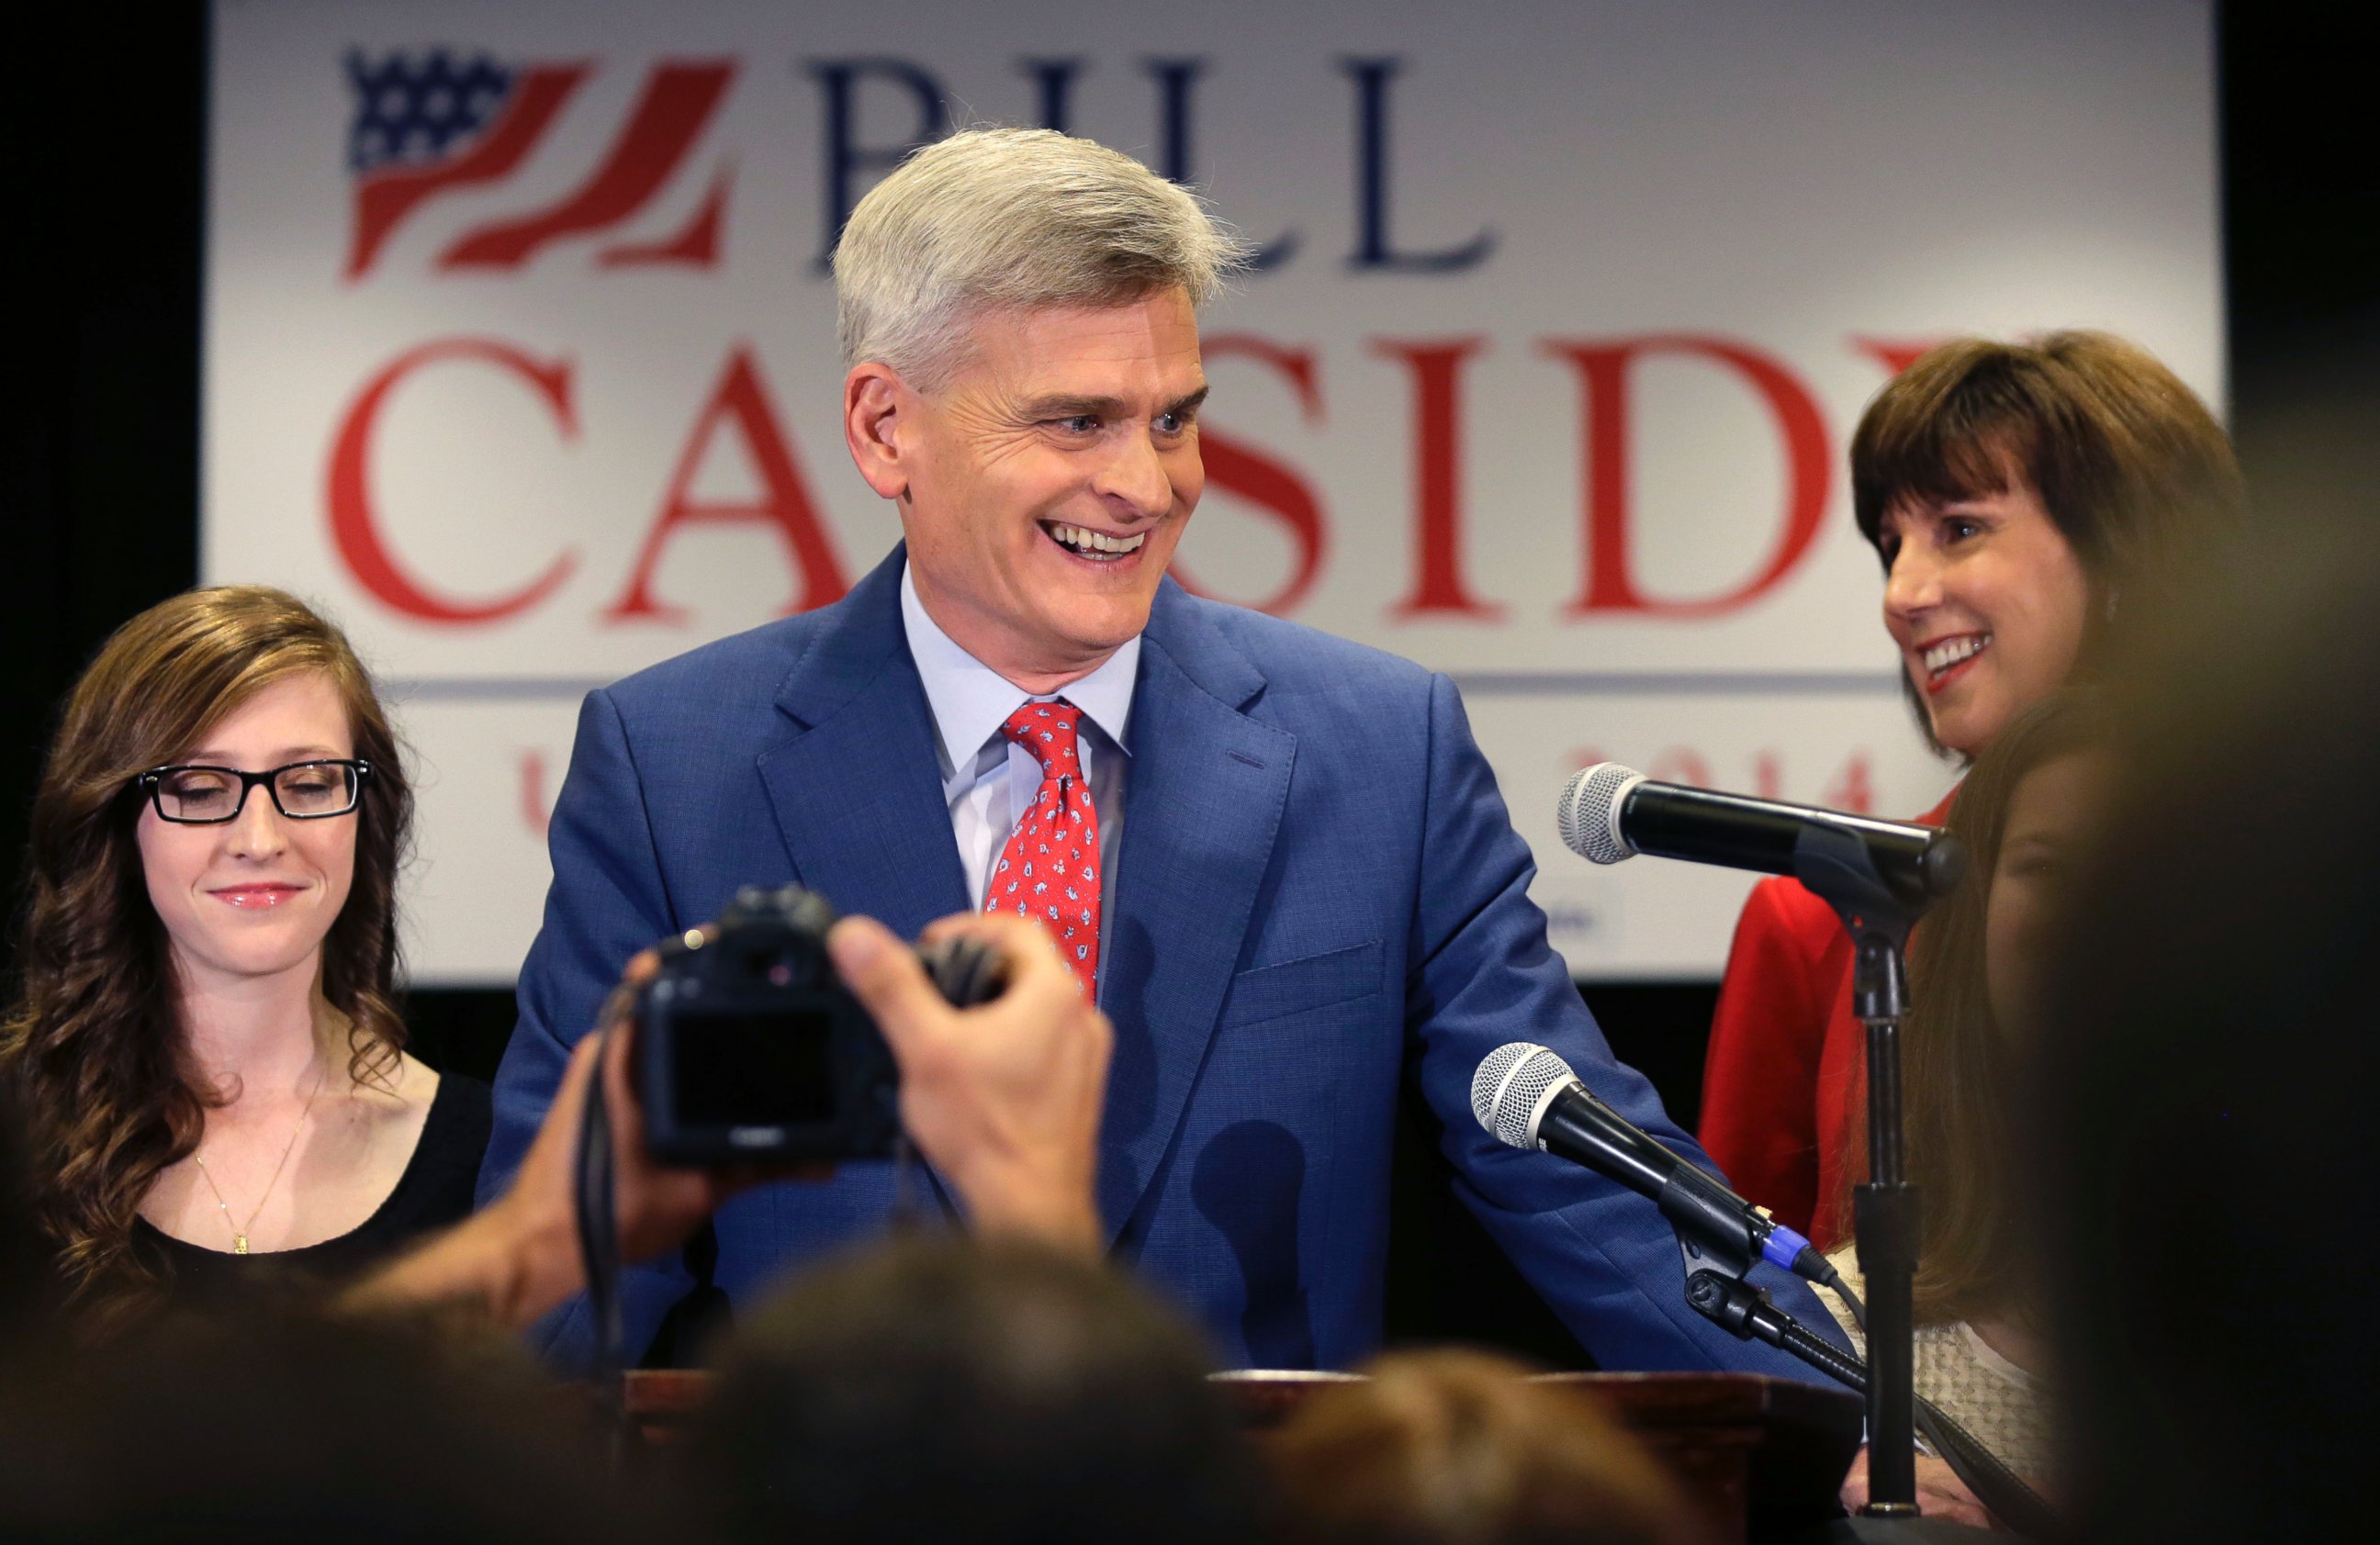 PHOTO: Louisiana Republican Senate candidate Rep. Bill Cassidy, R-La., who is challenging incumbent Sen. Mary Landrieu, D-La., addresses supporters during his election night watch party in Baton Rouge, La., Nov. 4, 2014. 